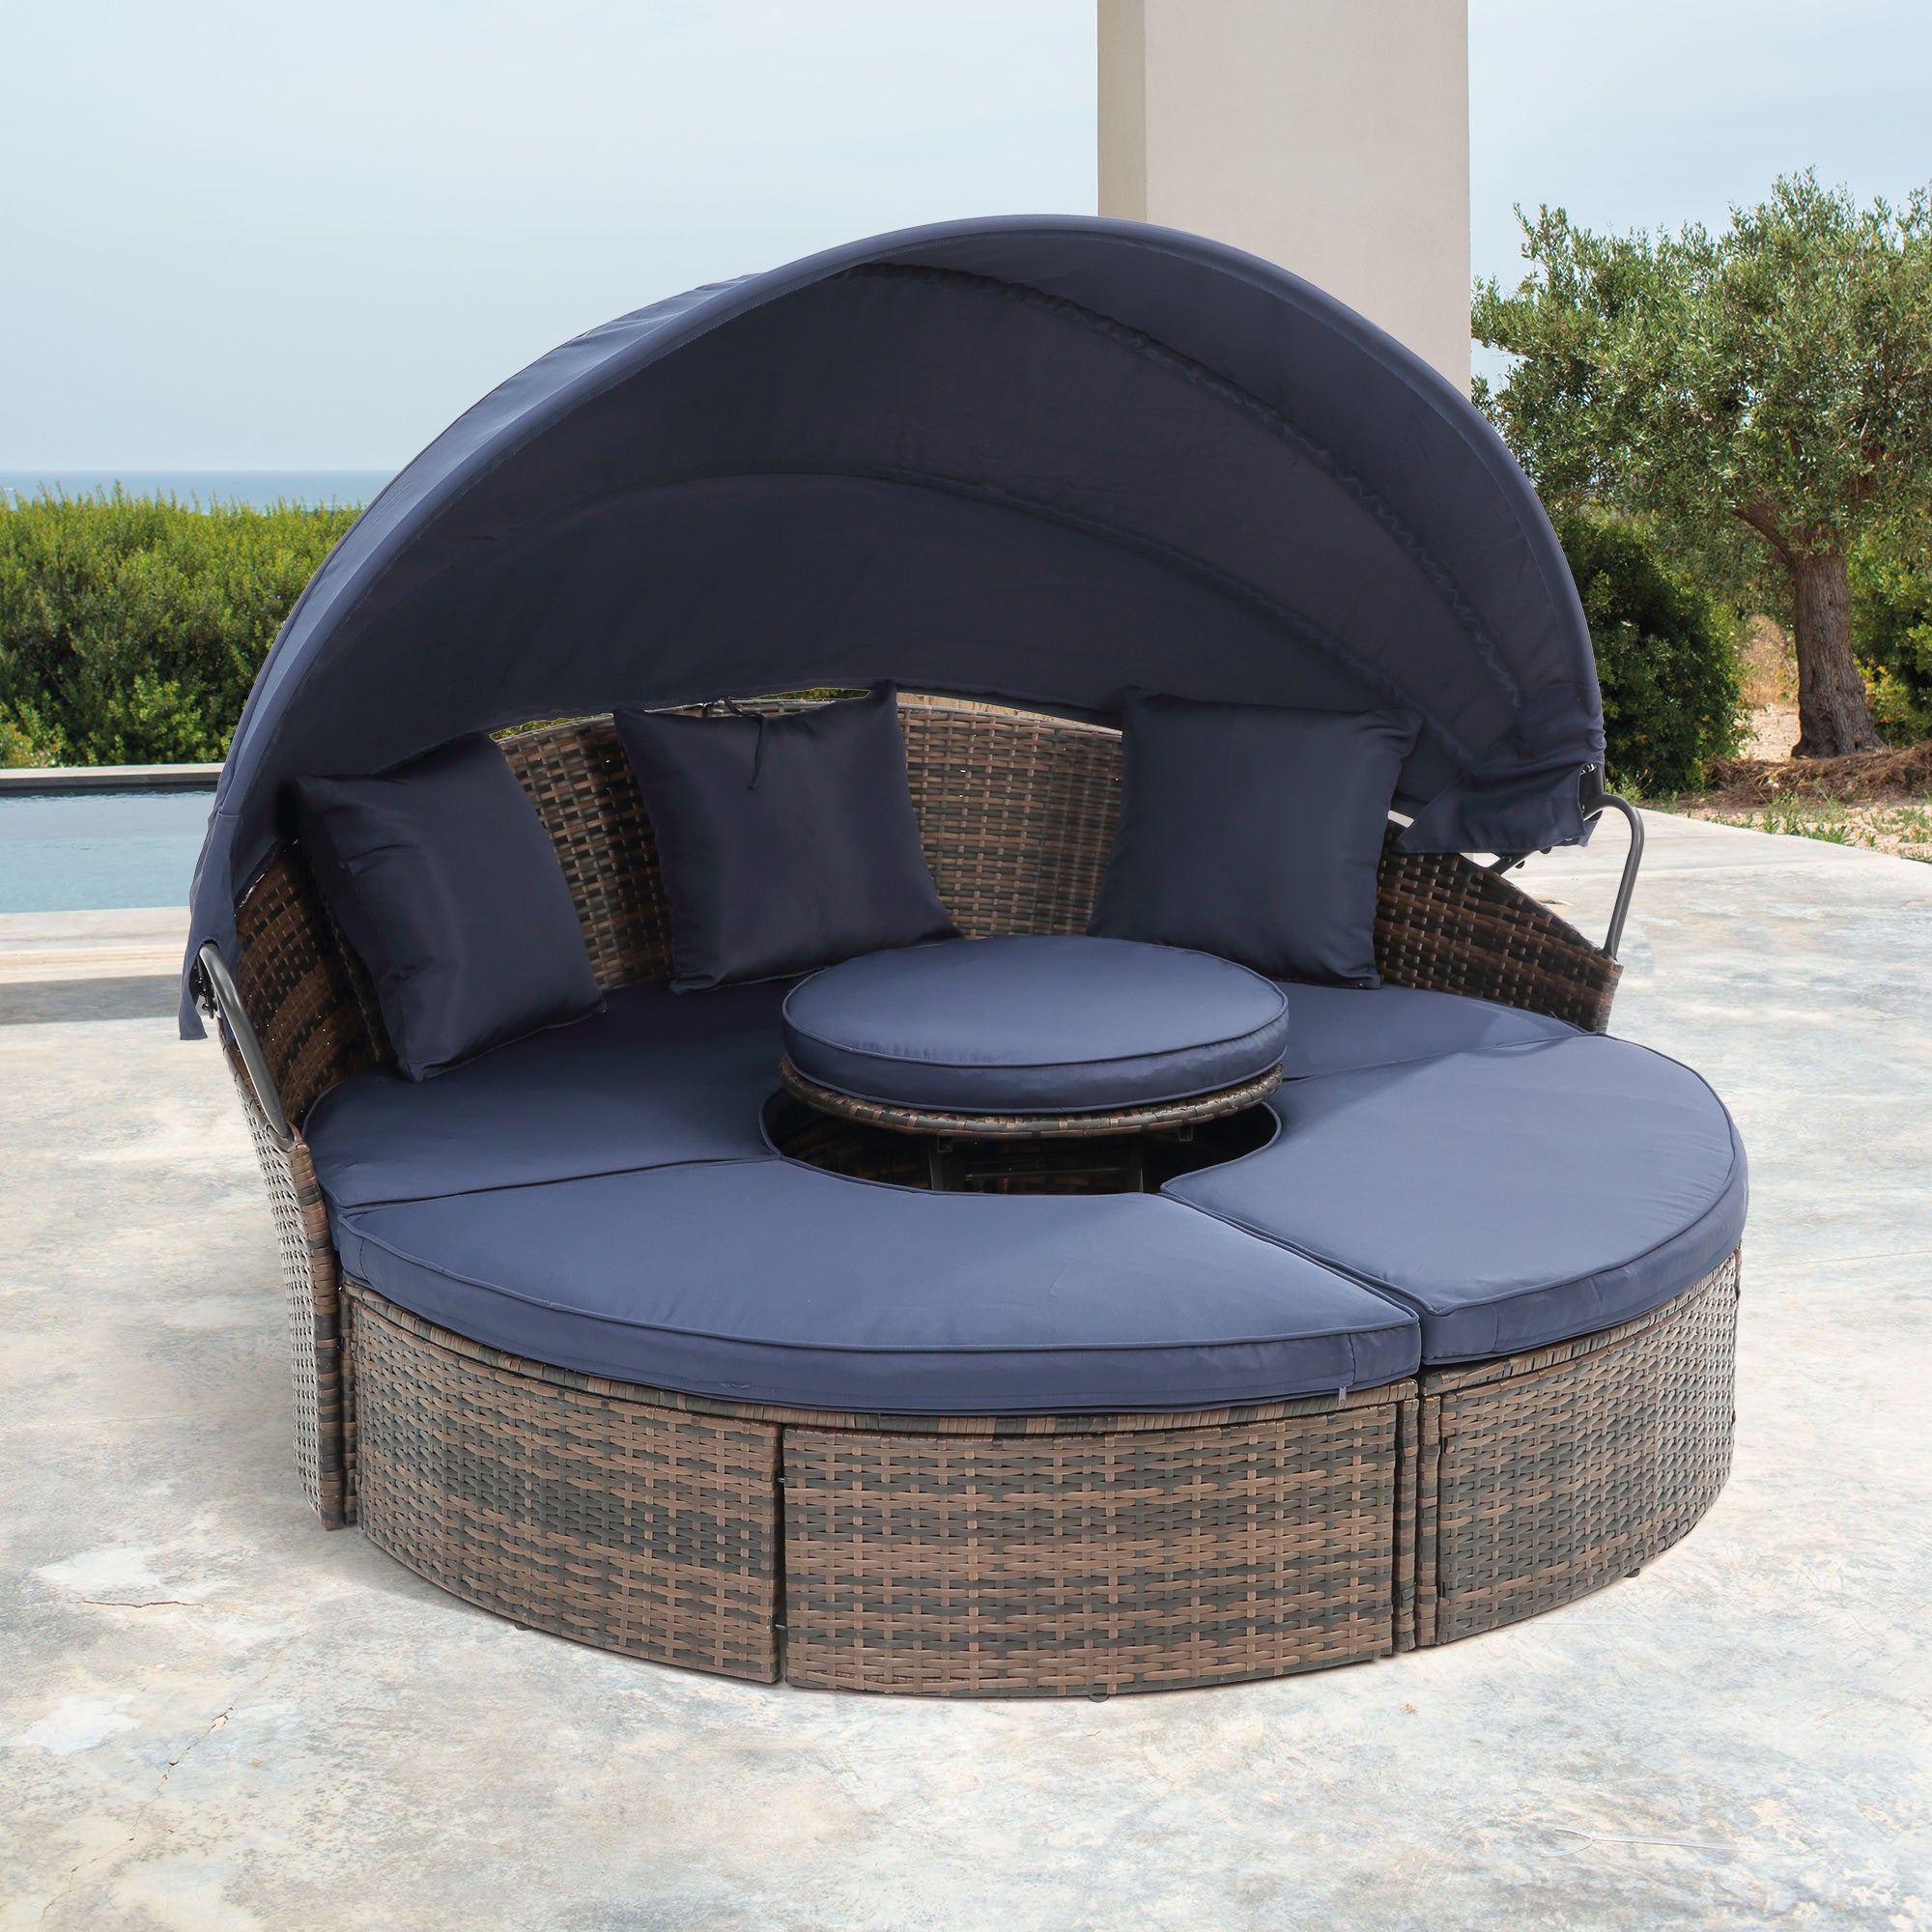 🆓🚛 5 Piece Patio Conversation Set, Rattan Round Lounge with Retractable Canopy, Wicker Outdoor Sofa Bed with Lift Coffee Table, Navy Blue